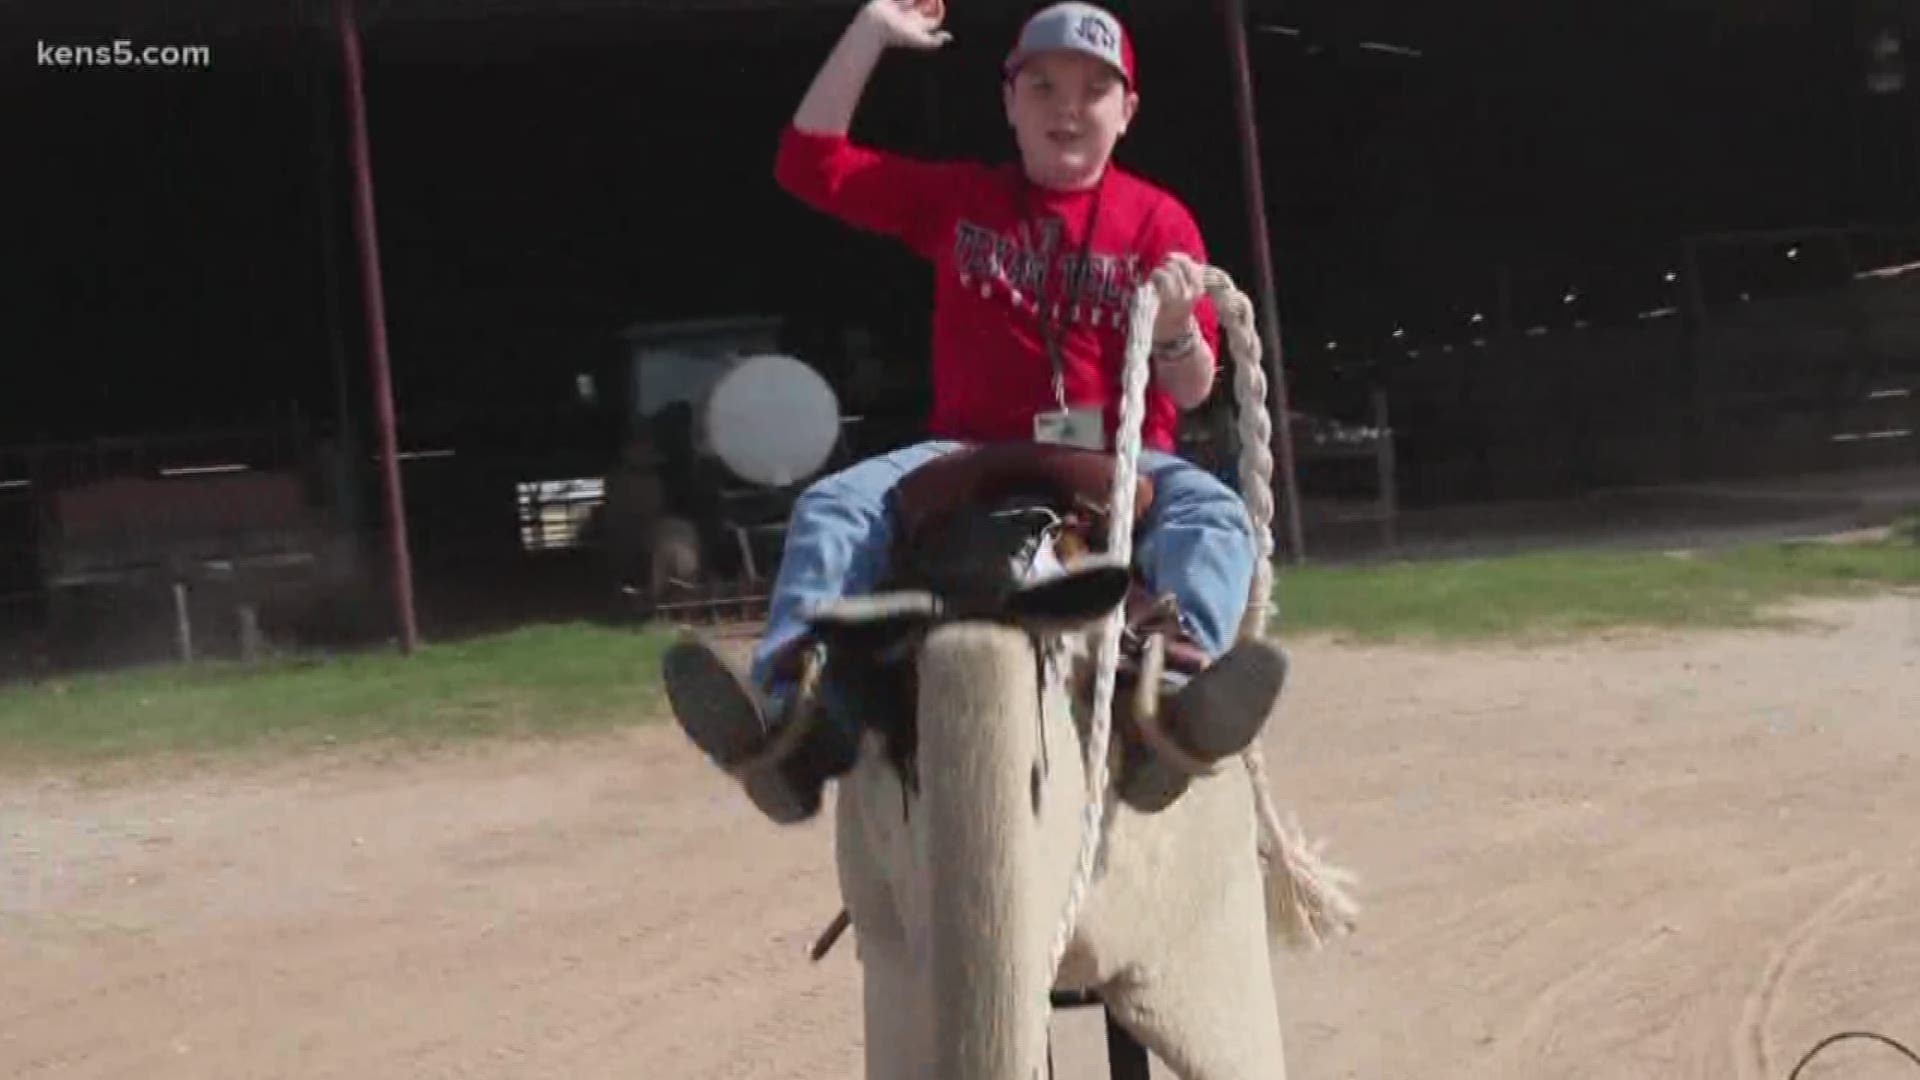 The PRCA Junior Rodeo Camp will be hosted at Hidden Springs Youth Ranch, March 12th to the 14th. Professional Rodeo cowboys will be teaching kids the arts of saddle bronc riding, tie-down roping, and more. Eyewitness News reporter Jon Coker has the details.